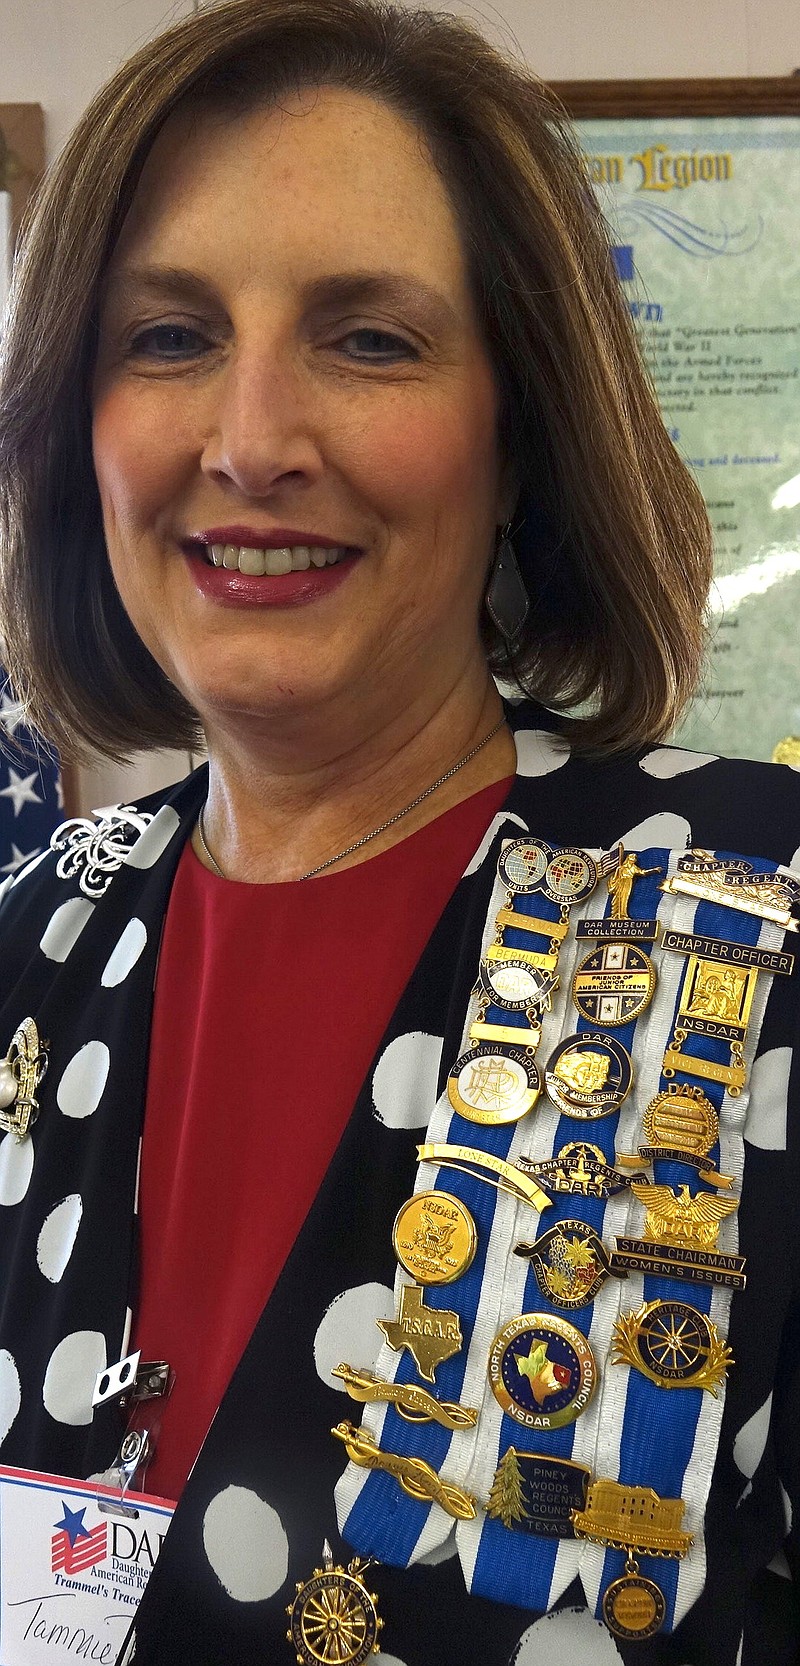 Tammie Duncan of Atlanta wears a shoulder adorned with pins and metals for the National Society of the Daughters of the American Revolution, including ones for her position as regent for the Lone Star DAR Chapter, which meets in Texarkana.